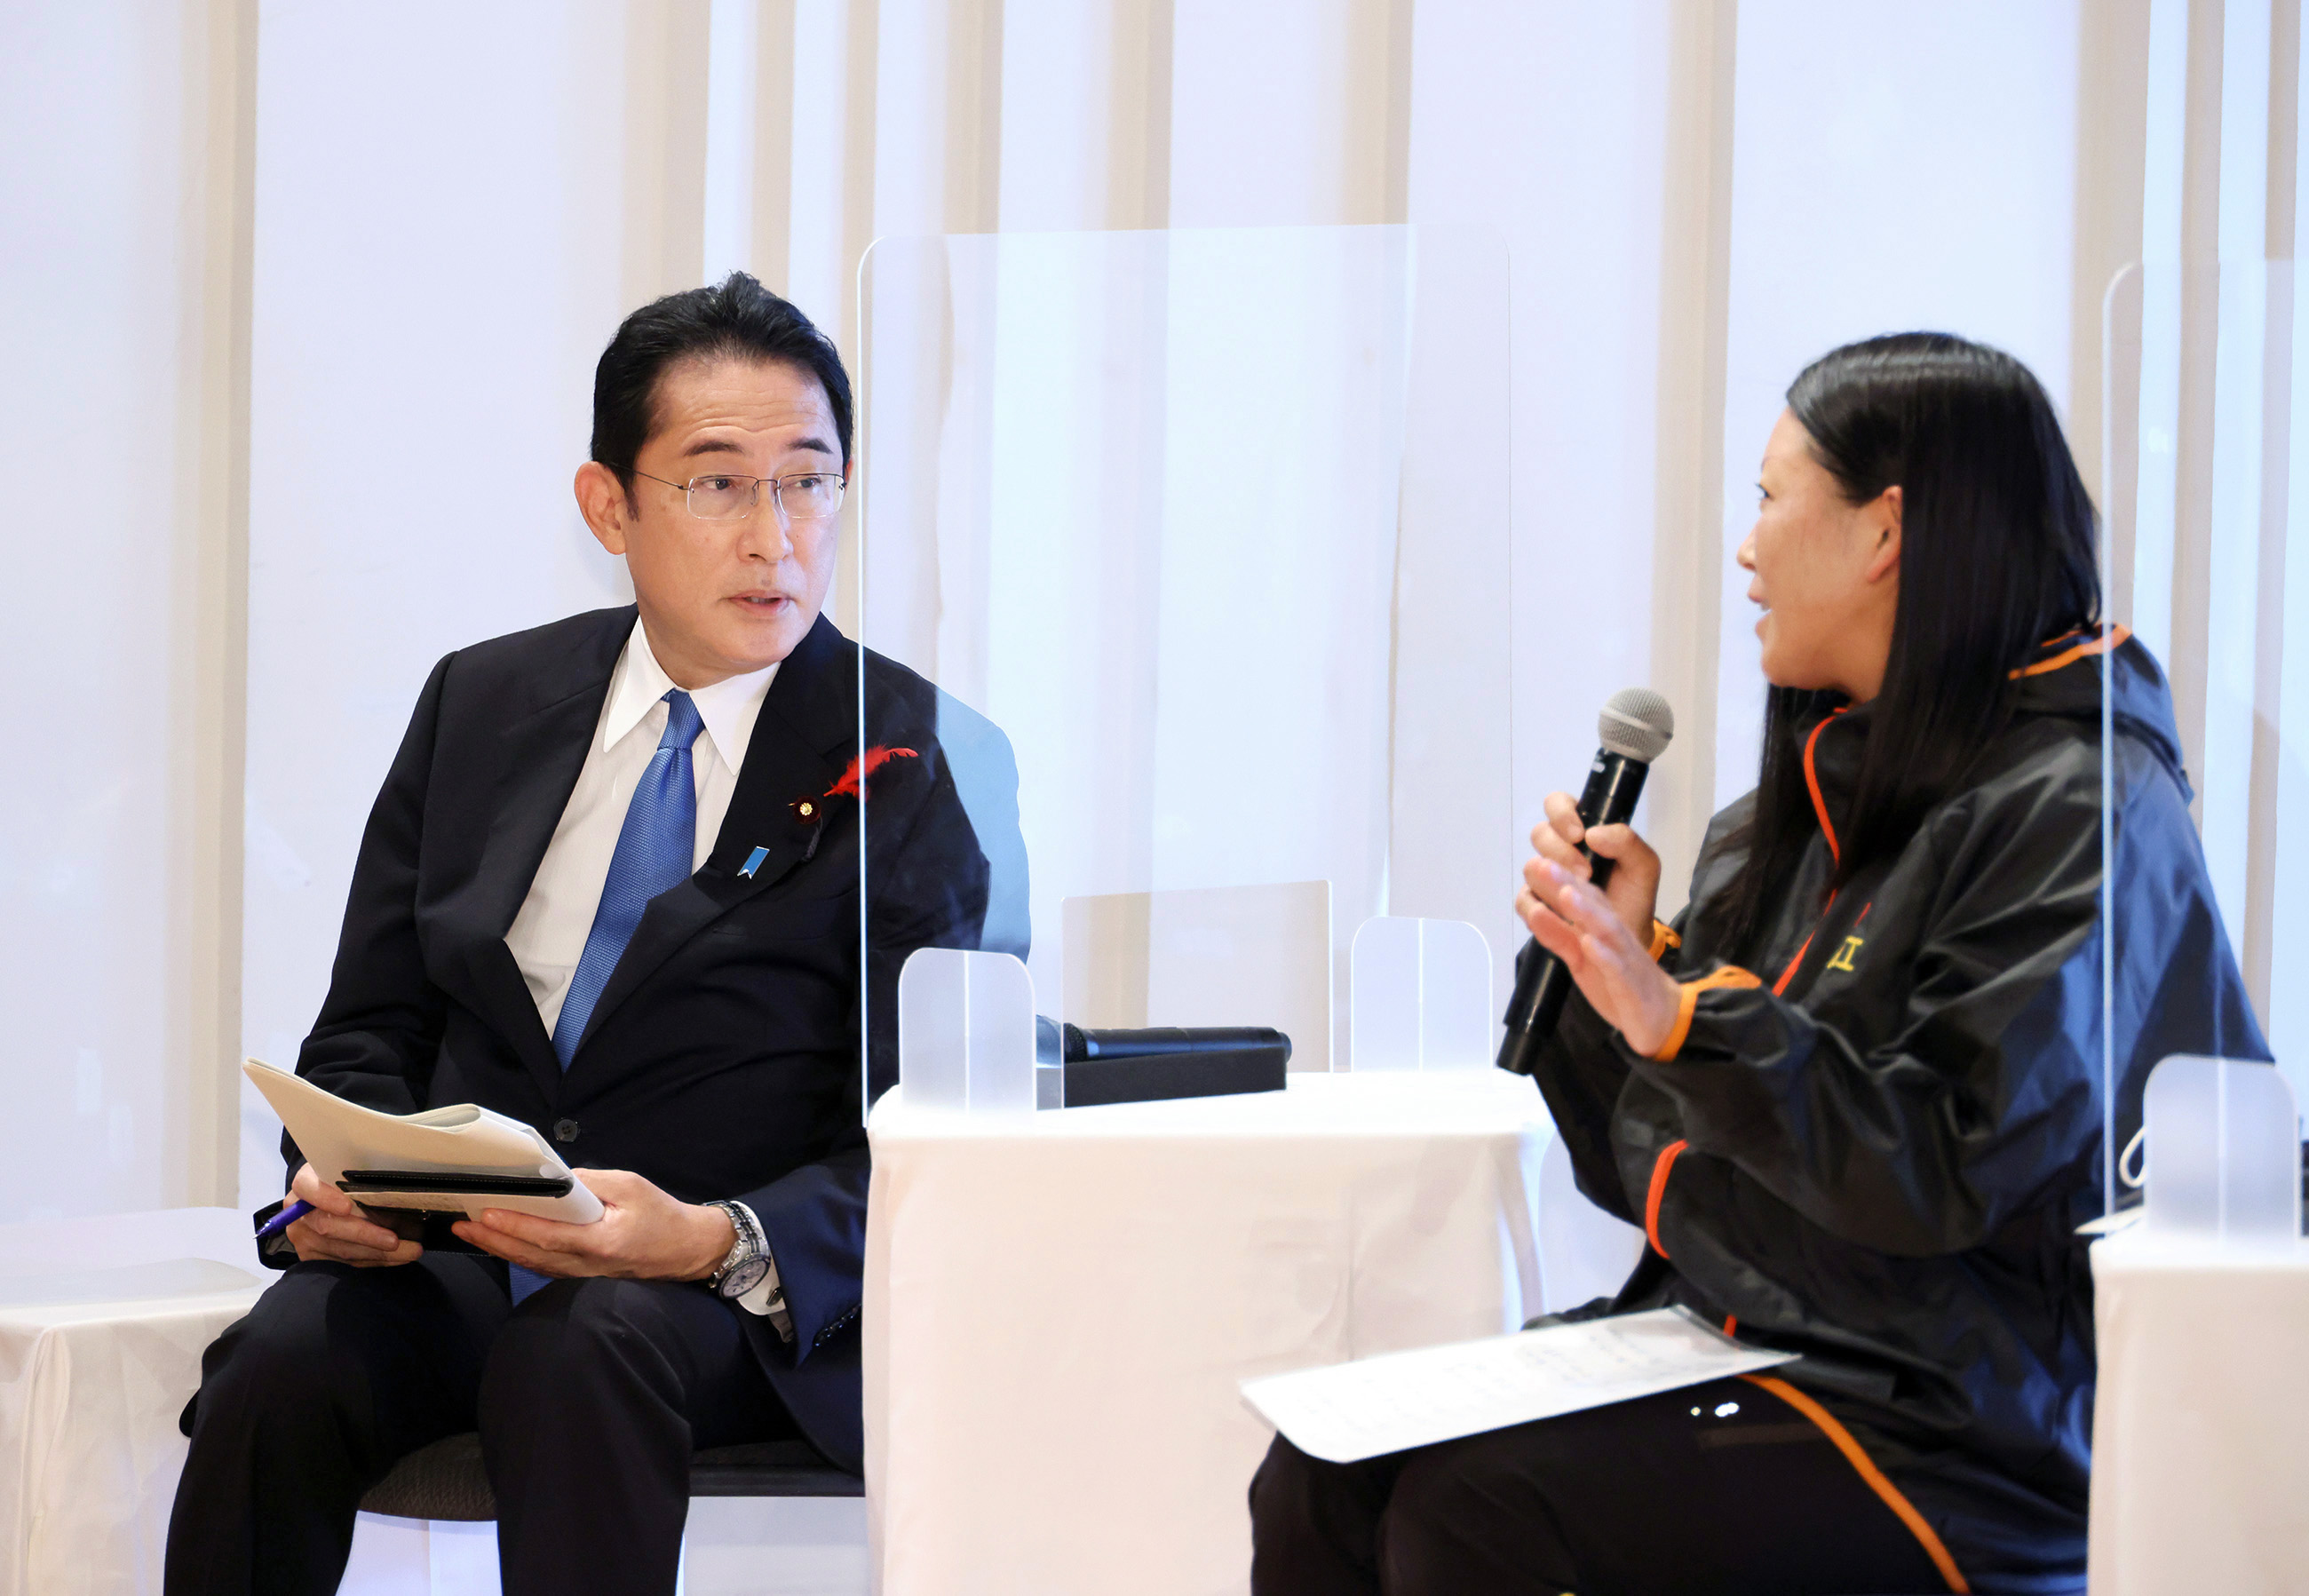 Photograph of the Prime Minister listening to other participants at a roundtable talk (1)